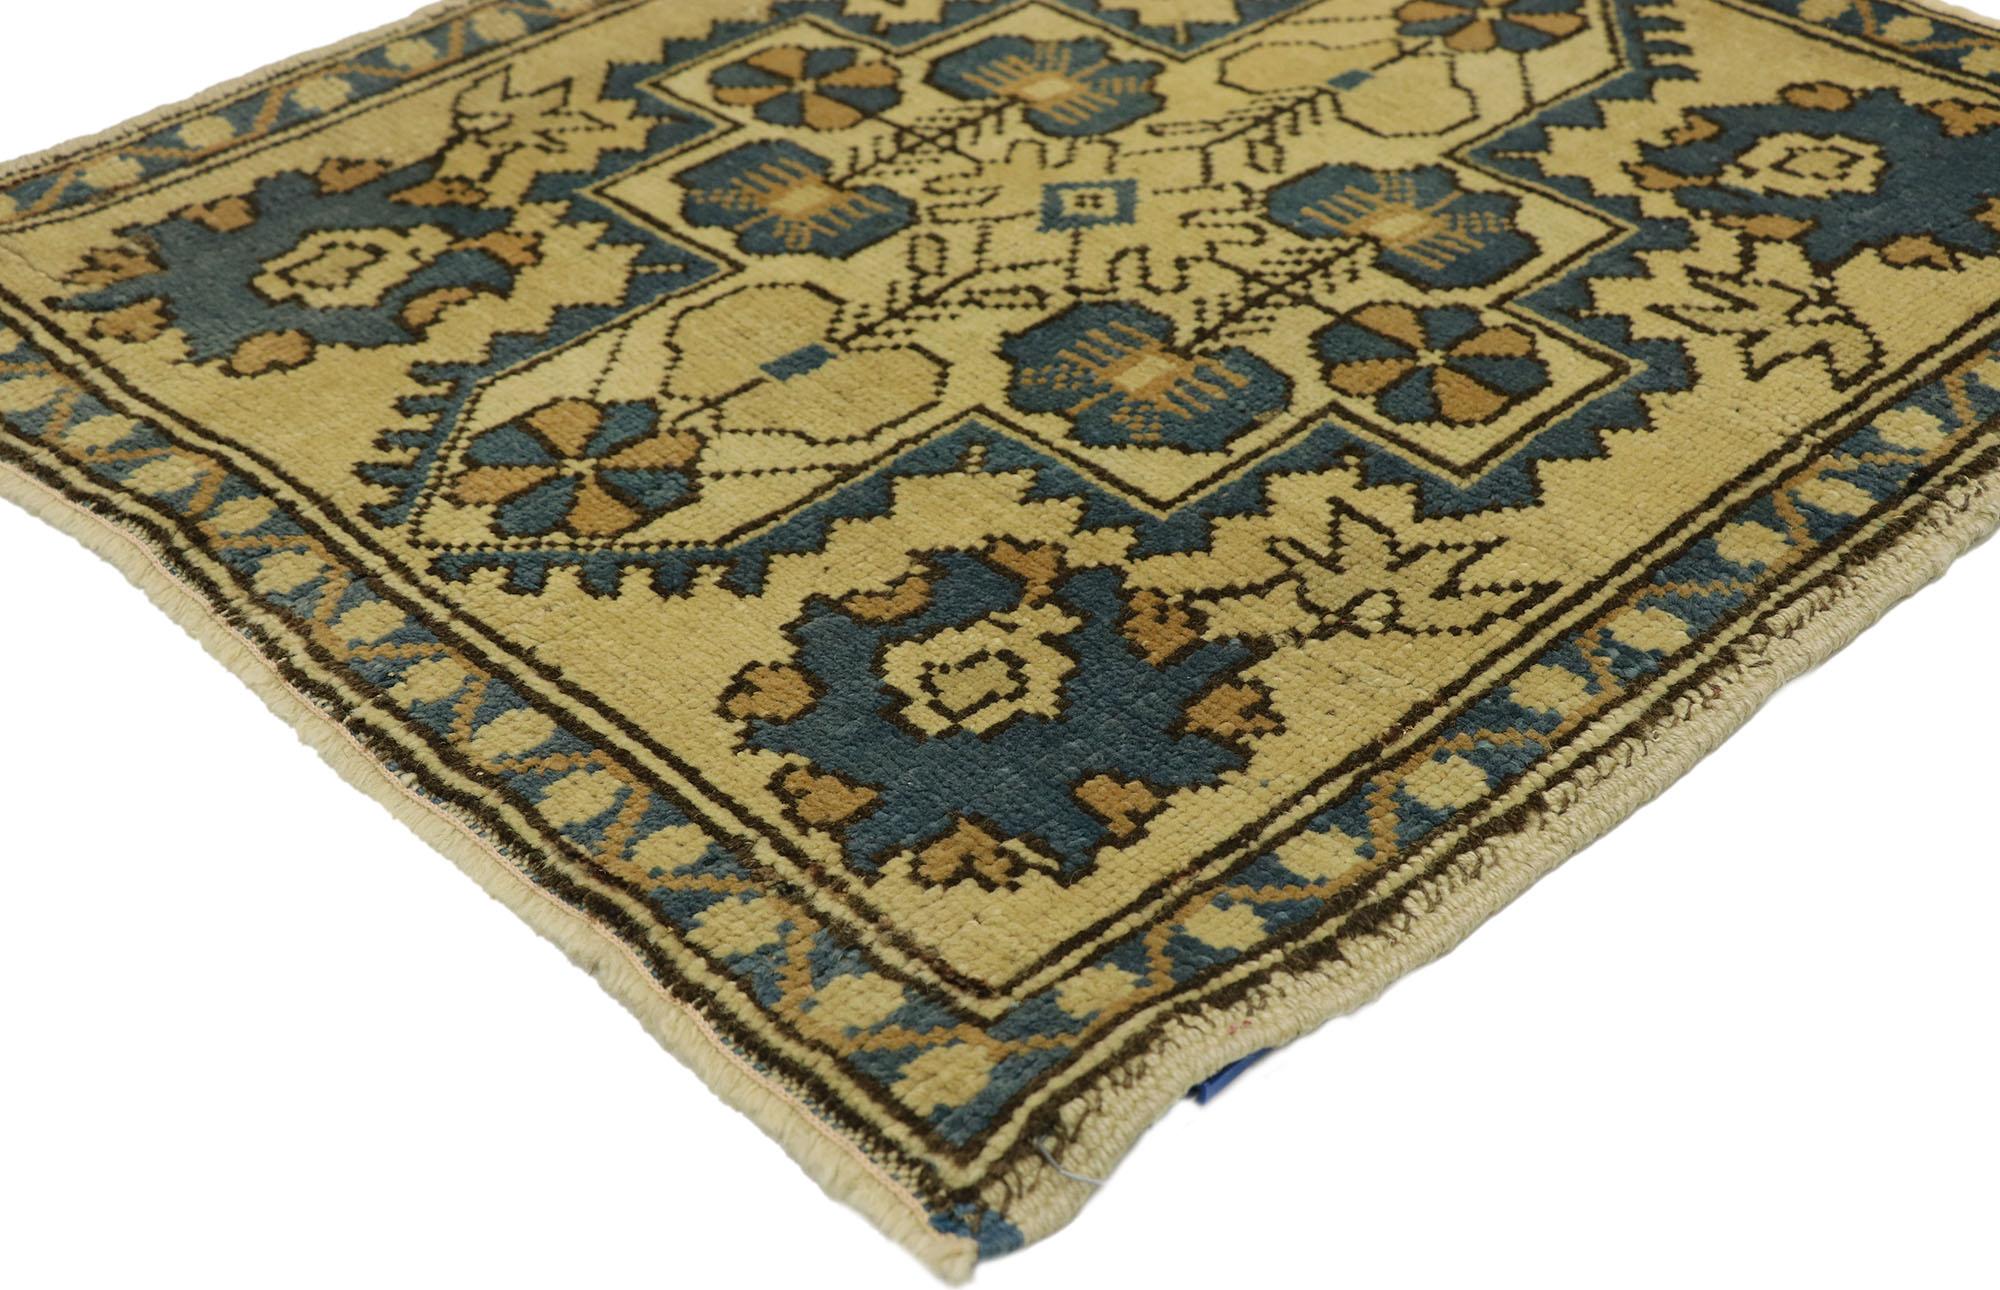 51260 Vintage Turkish Yastik Rug, 02'03 x 02'04. In this hand-knotted wool vintage Turkish Yastik rug, effortless grace and subtle refinement come together to form a captivating piece imbued with a hint of Mediterranean charm. The ecru-tan